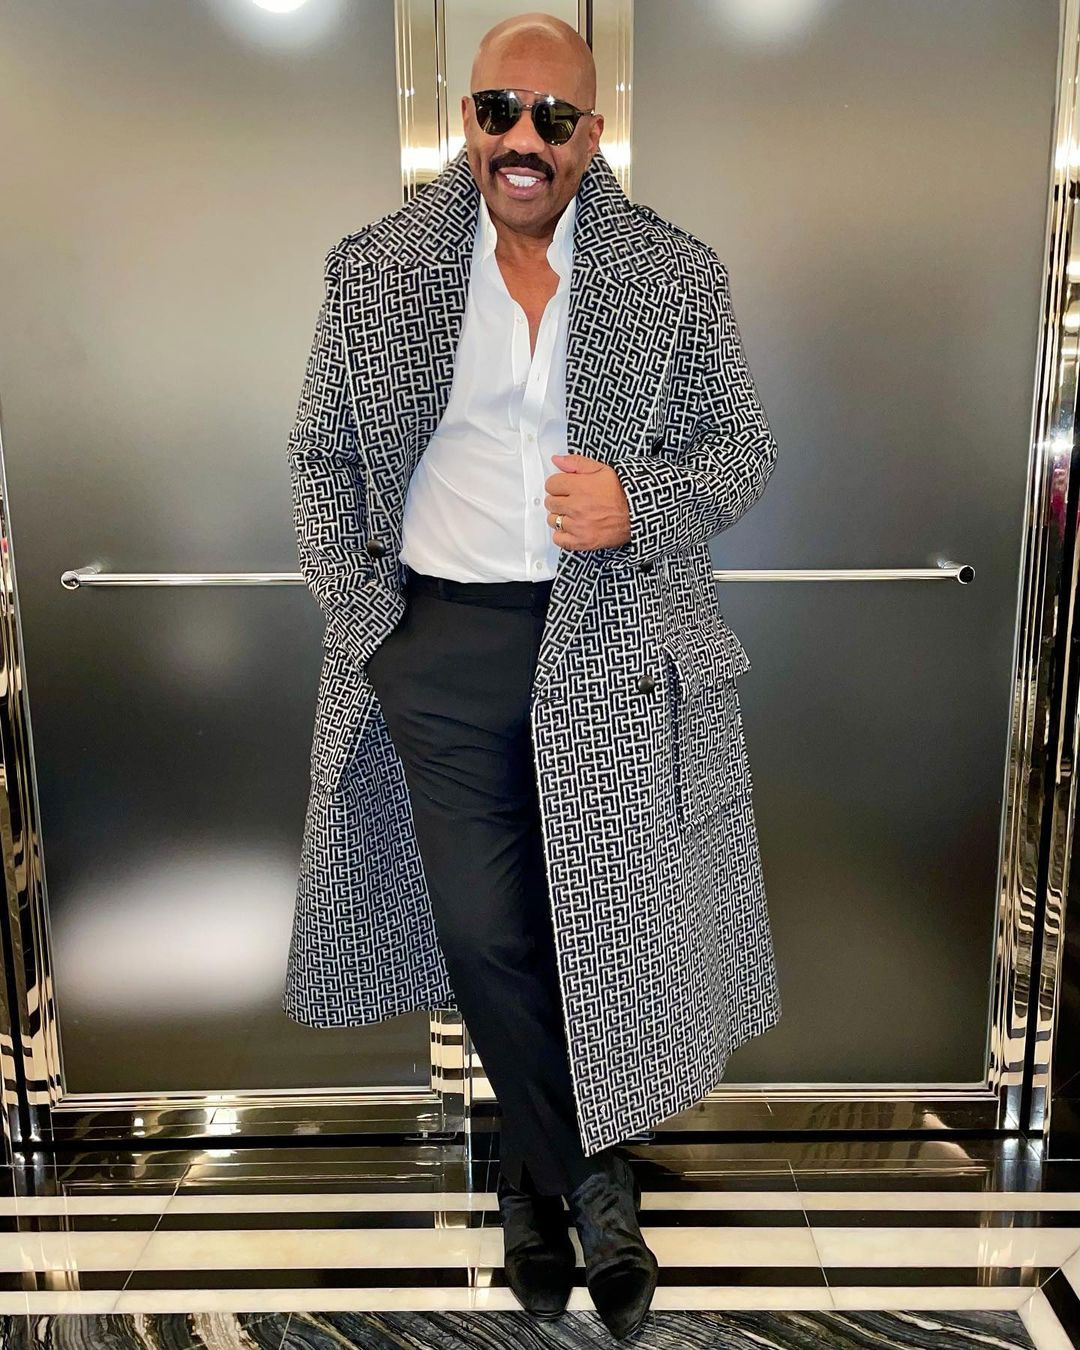 Steve Harvey Gets Couture Fashion Makeover, Fans React